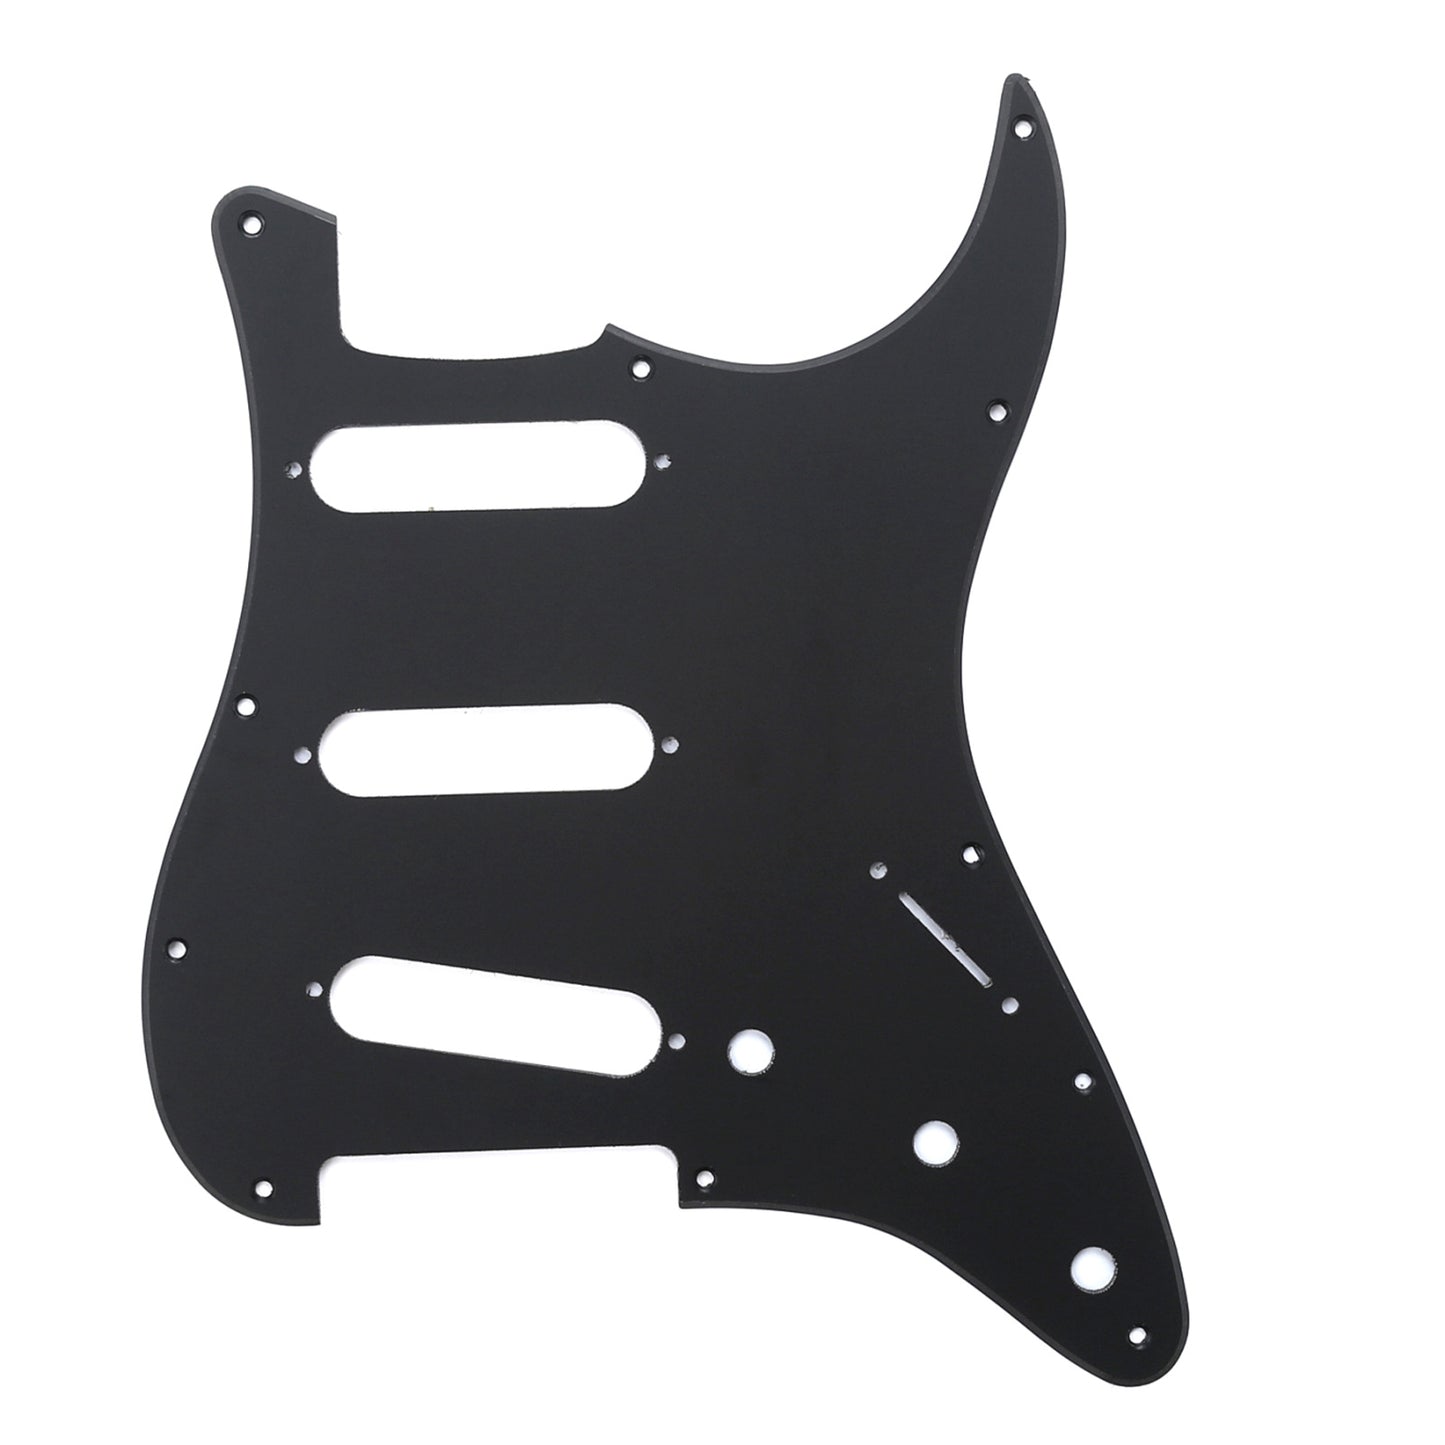 Musiclily SSS 11 Hole Strat Guitar Pickguard for Fender USA/Mexican Made Standard Stratocaster Modern Style, 1Ply Matte Black